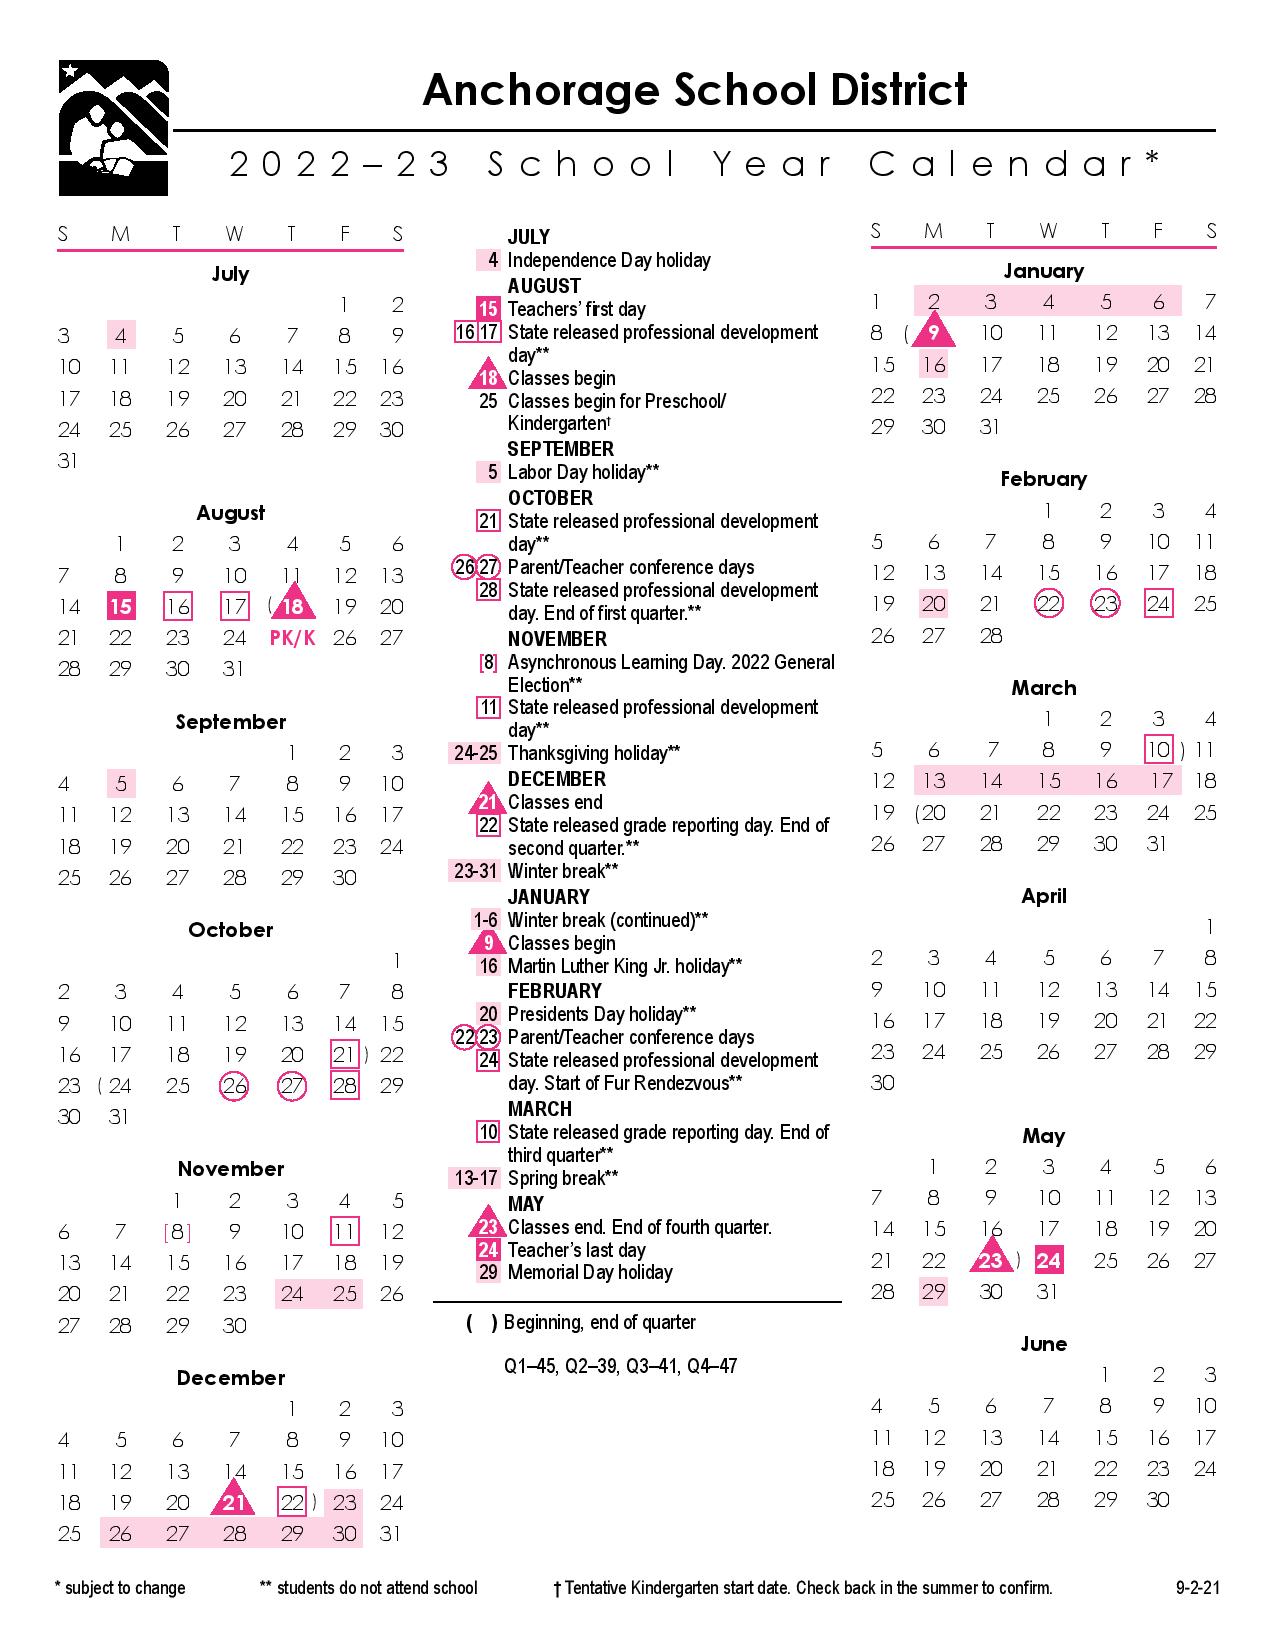 Anchorage School District Calendar 2022 and 2023